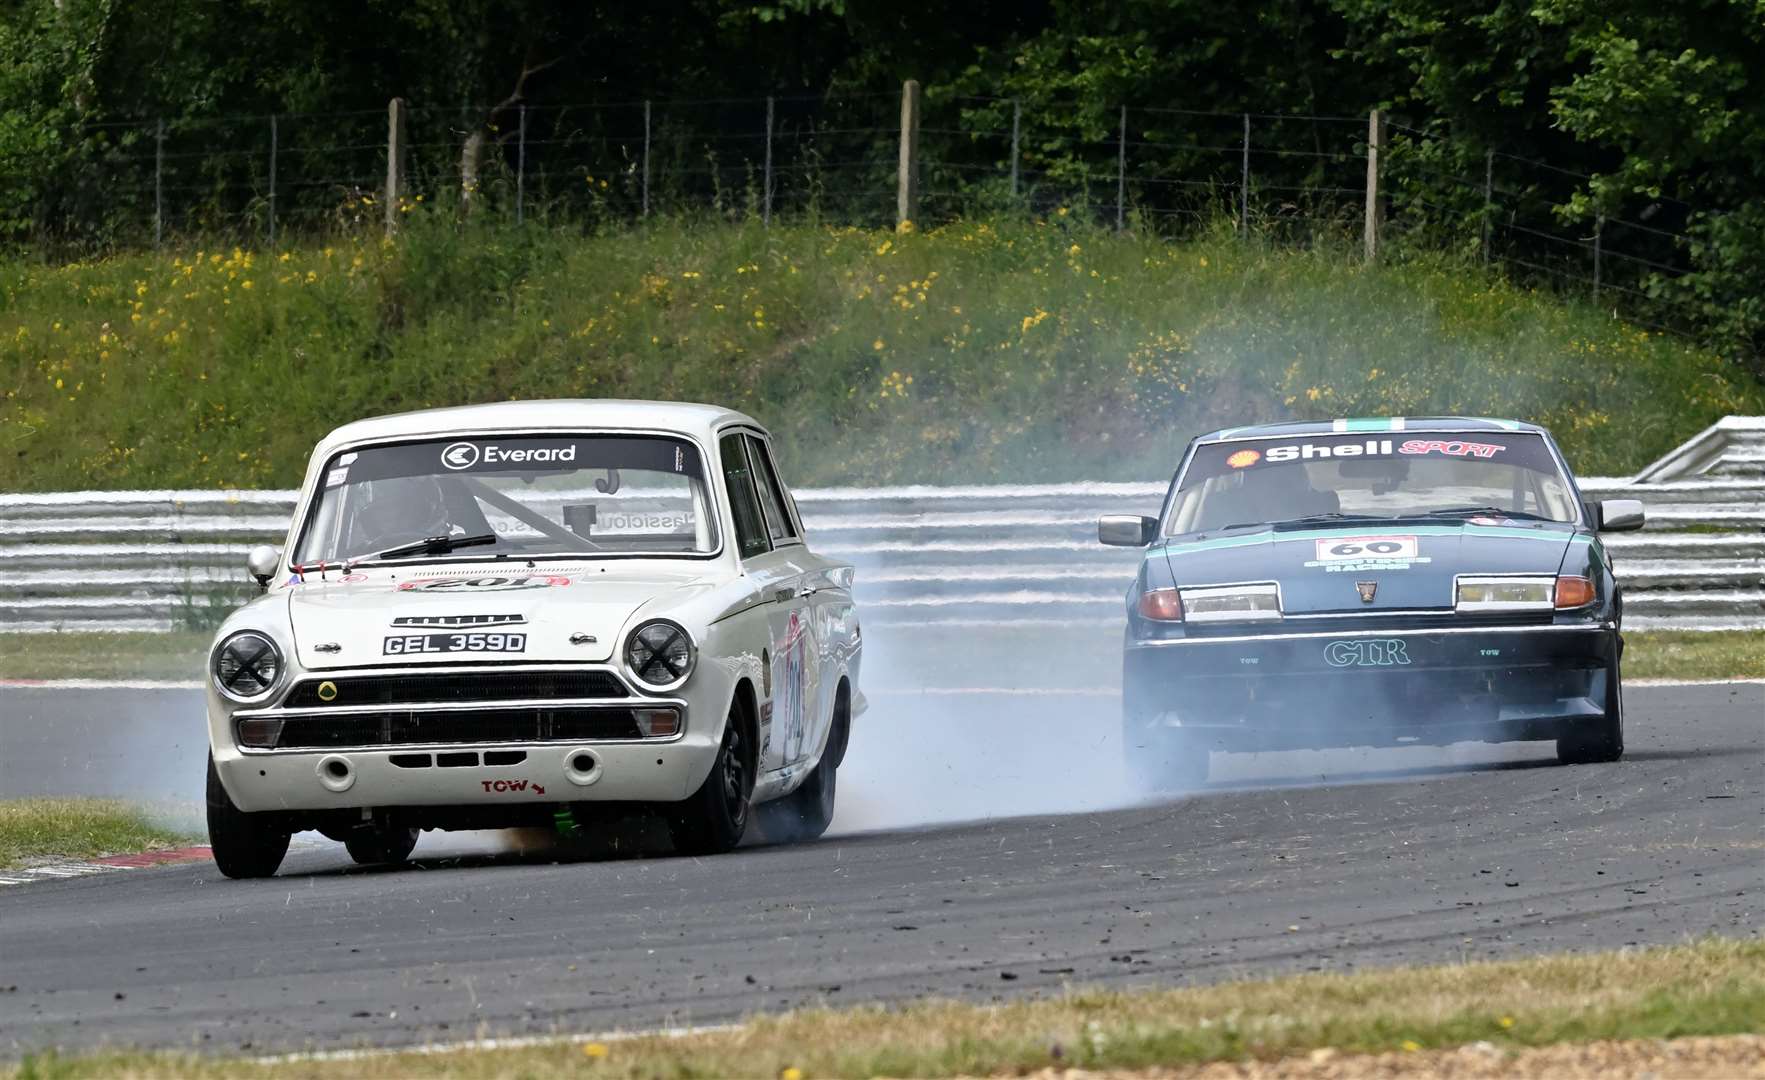 Pat Kenneally, from Sheerness, retired from the second Pre 66 race on Saturday in his Lotus Cortina, with smoke pouring from his engine. Picture: Simon Hildrew